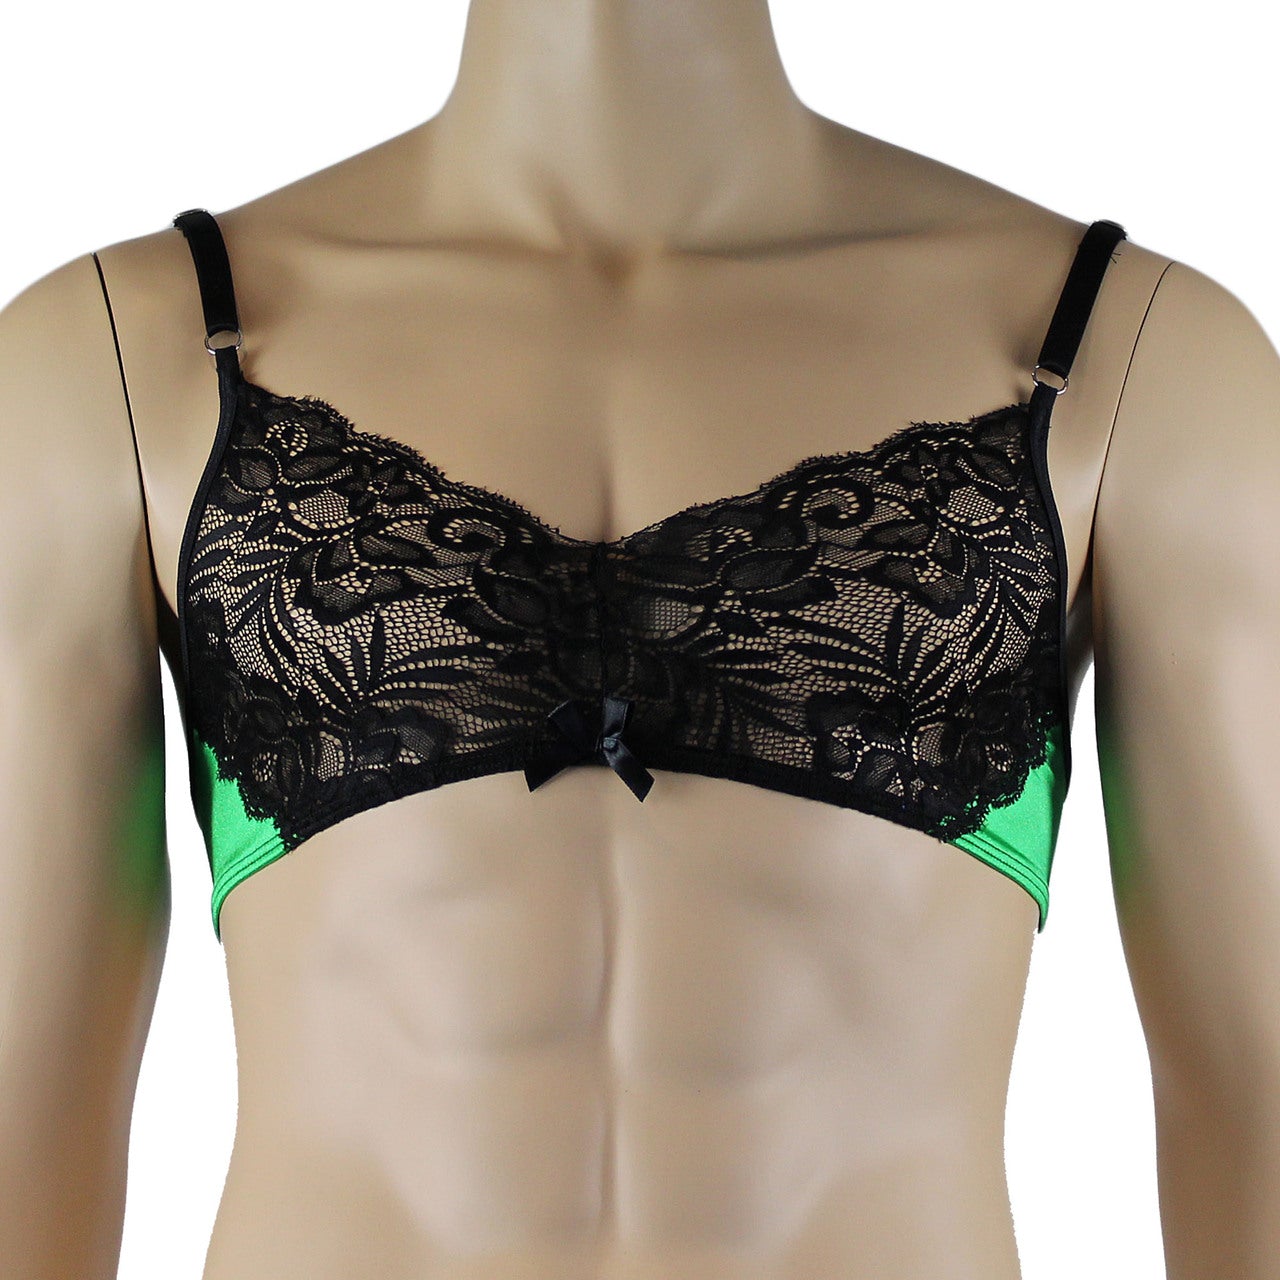 Mens Risque Bra Top (green and black plus other colours)